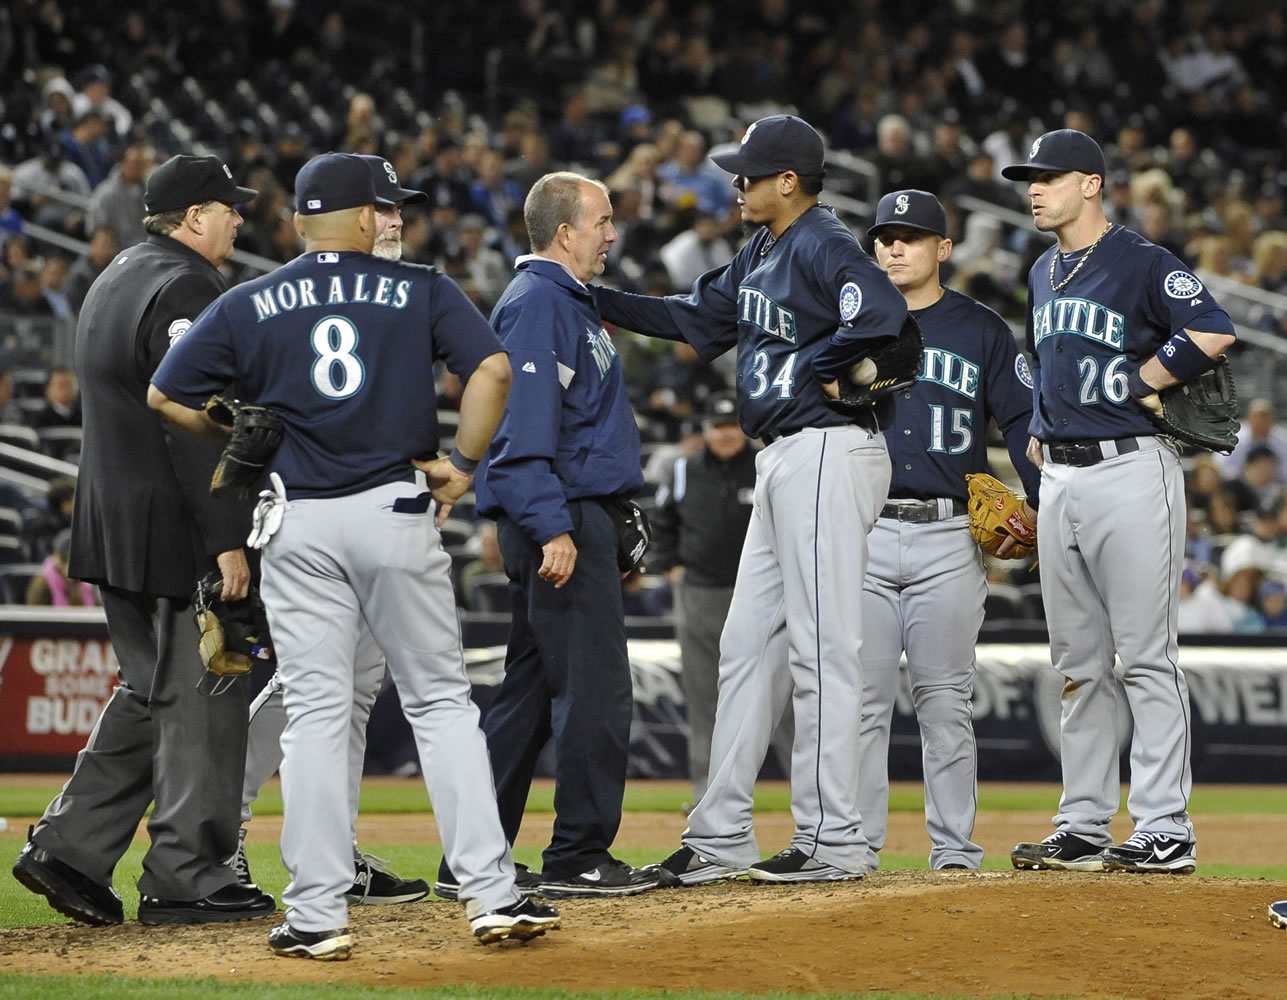 A Seattle Mariners trainer comes to the mound to check on starting pitcher Felix Hernandez (34) after the Mariners pitcher aggravated his sore back.